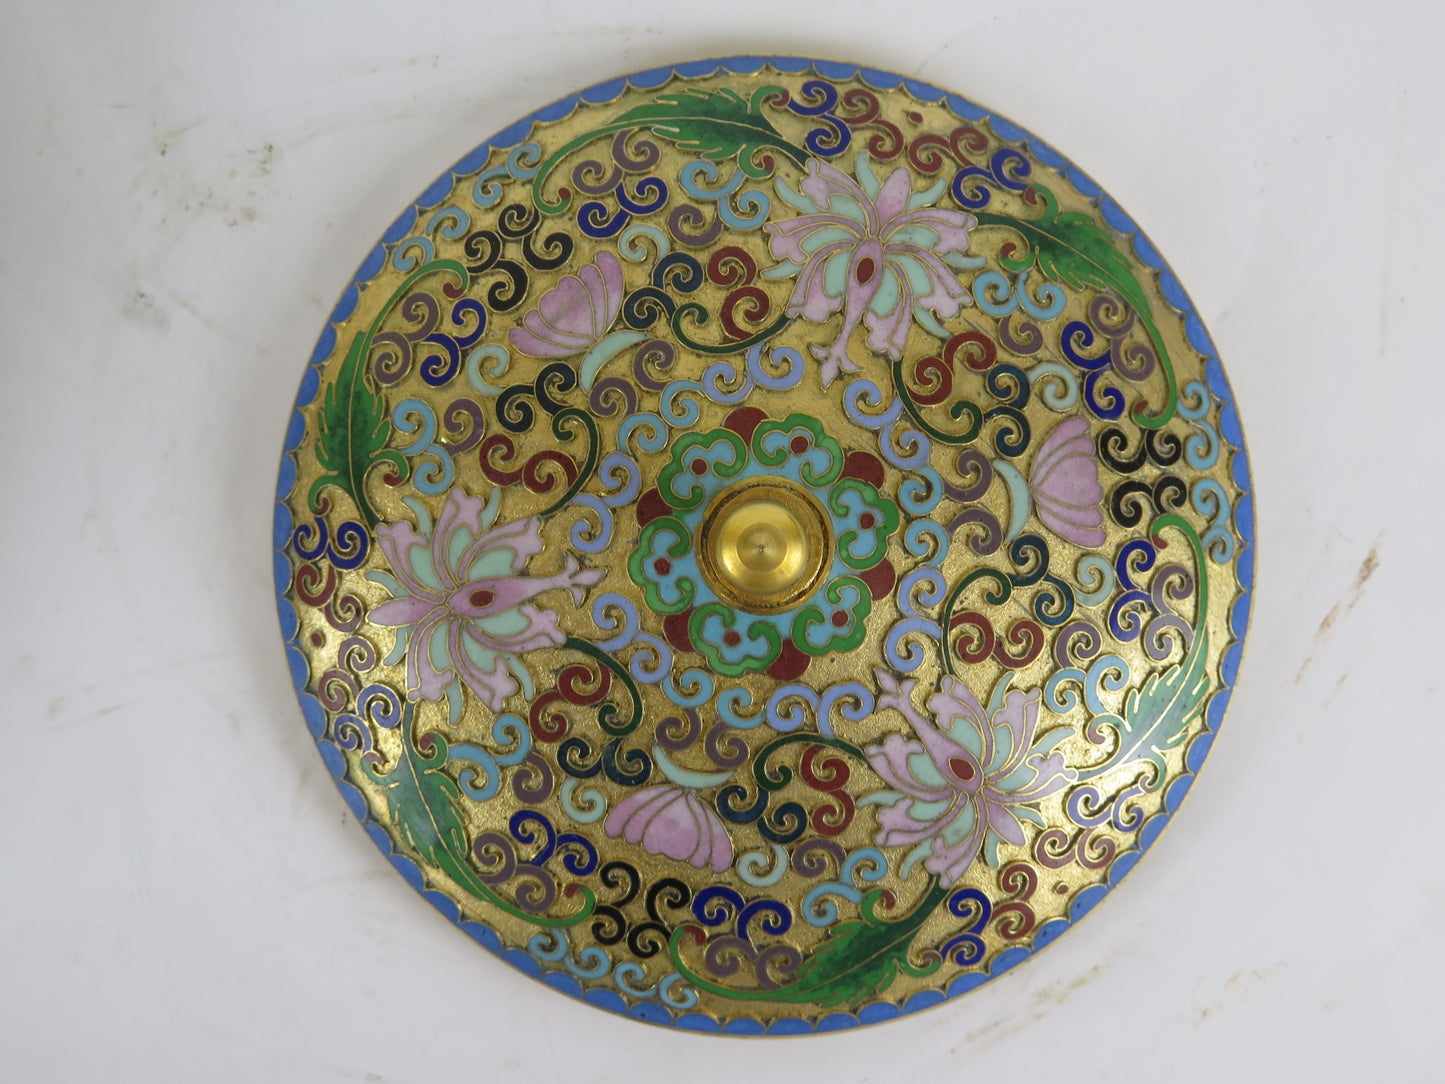 High quality china asia 1900s vintage cloisonné jewelry box CM4